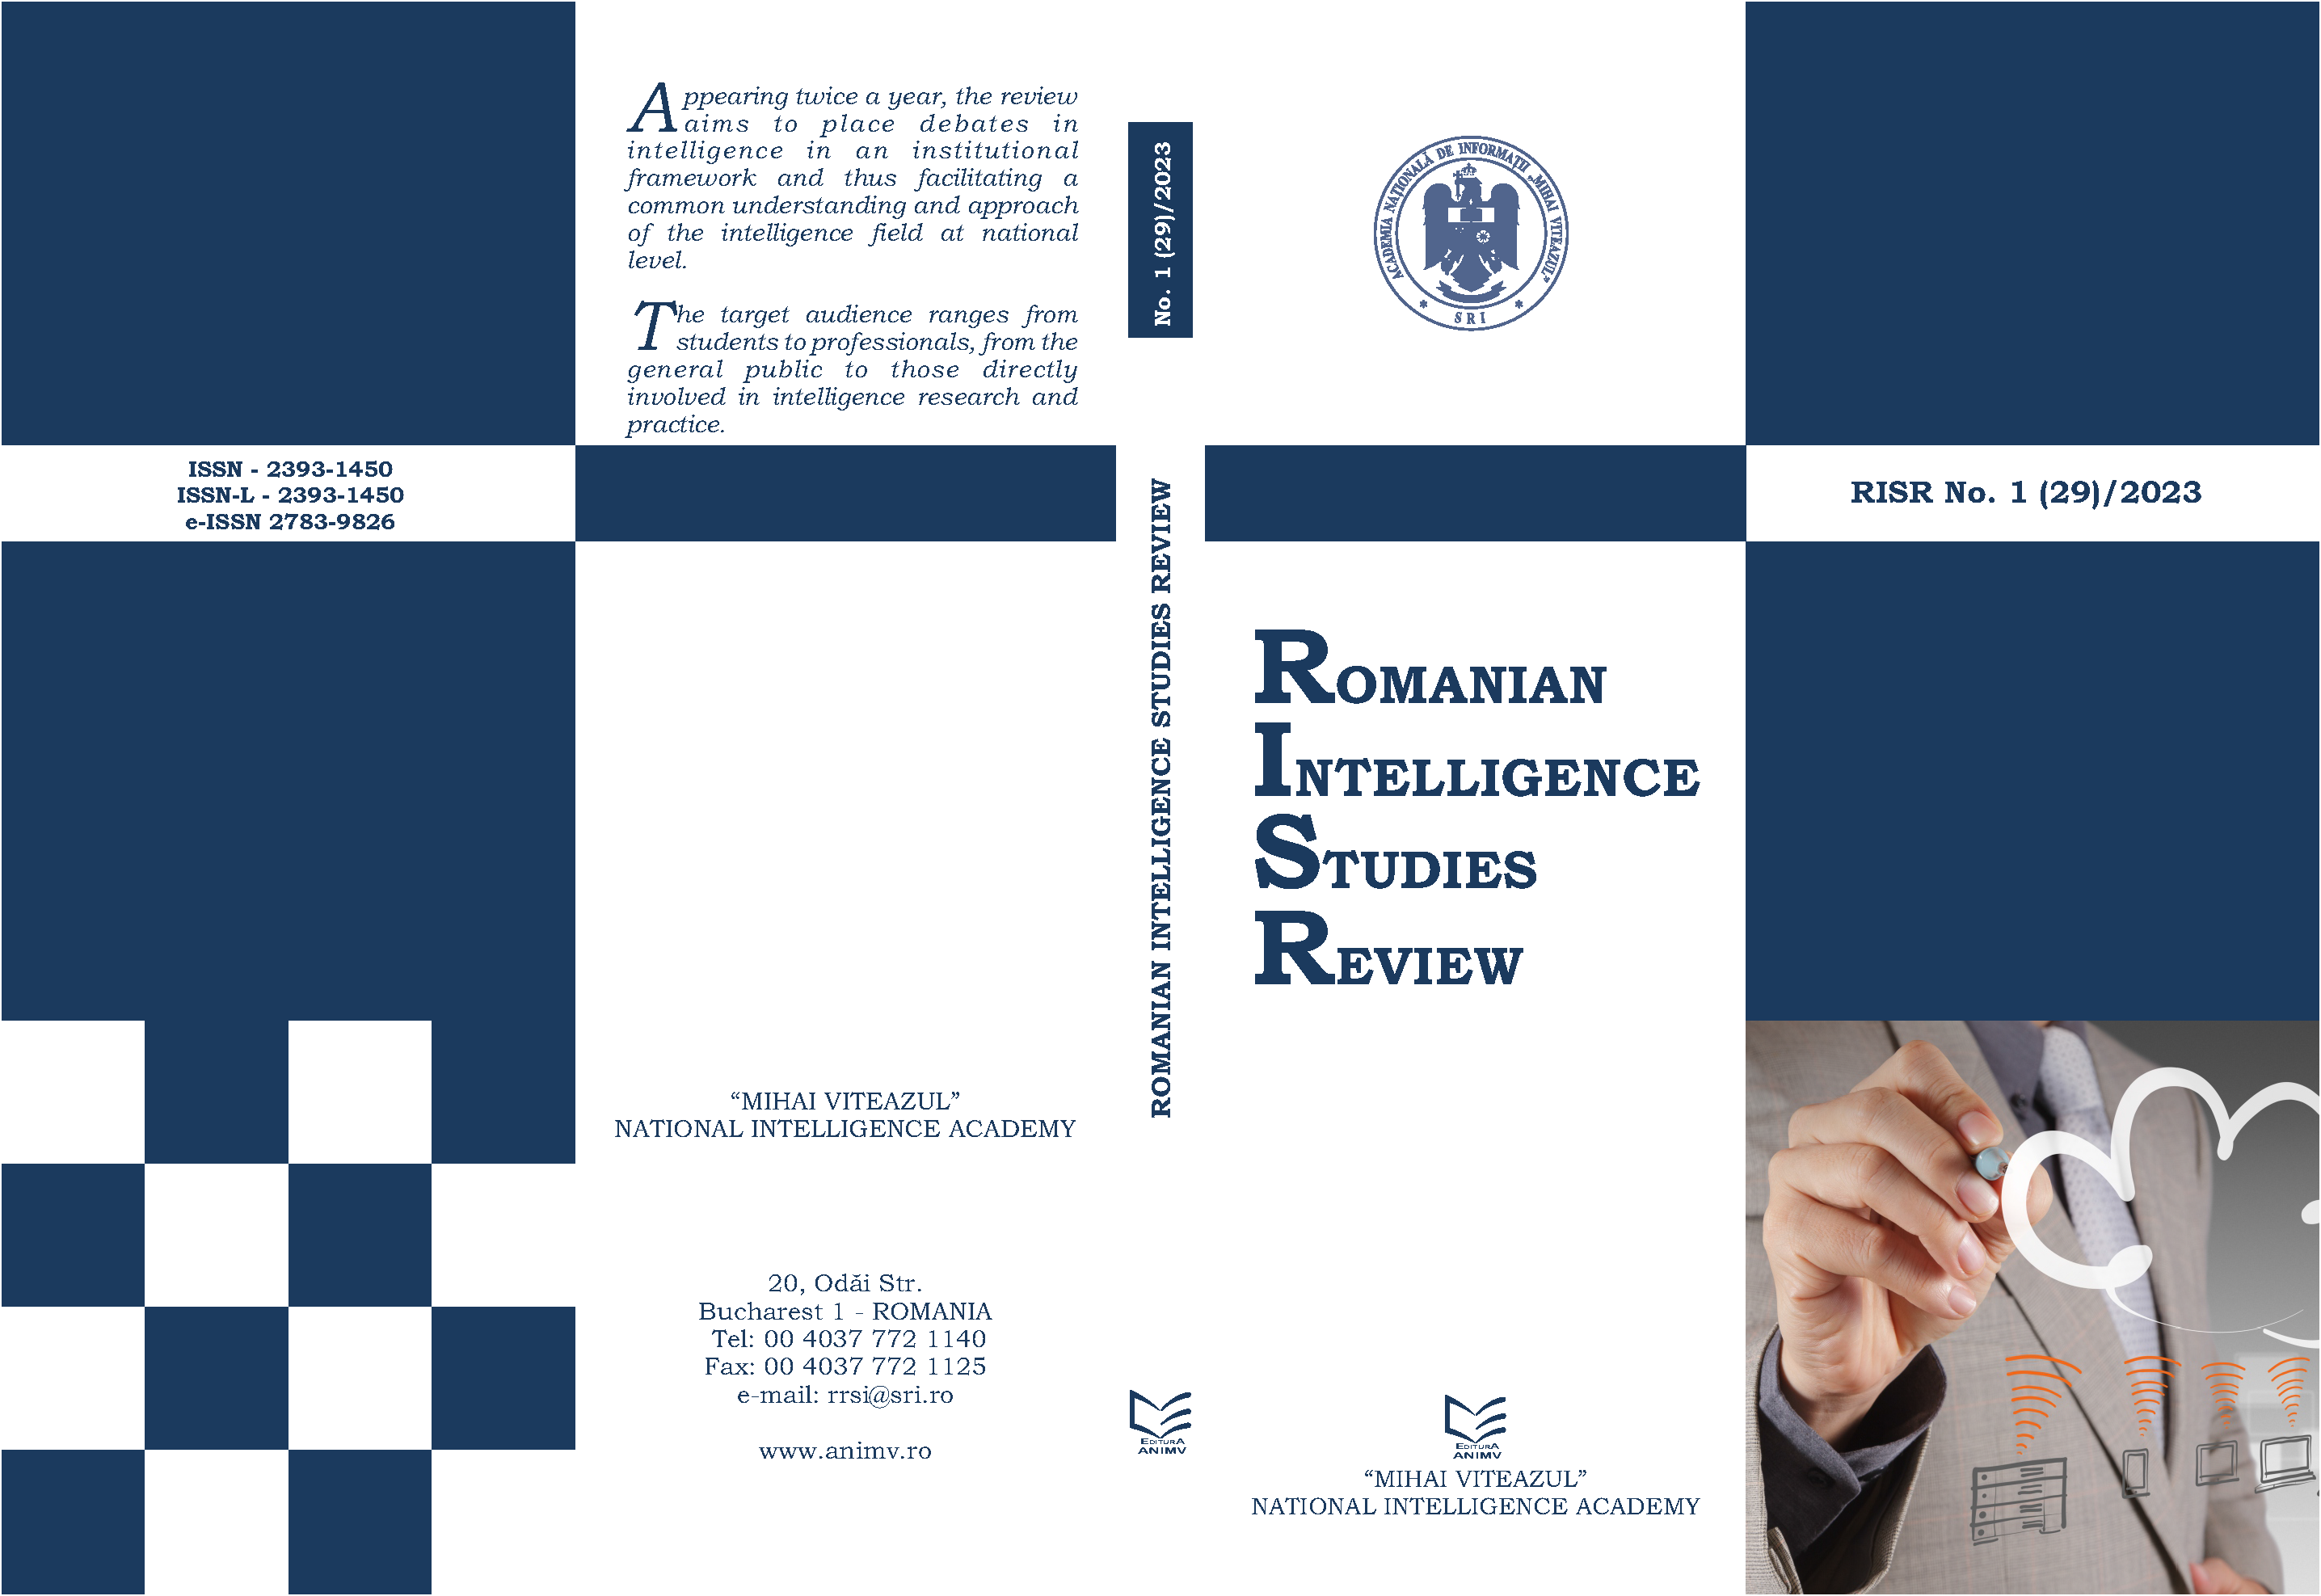 THE IMPERATIVES OF RESHAPING THE NATURE OF INTELLIGENCE TO ADDRESS THE 21ST CENTURY SECURITY CHALLENGES Cover Image